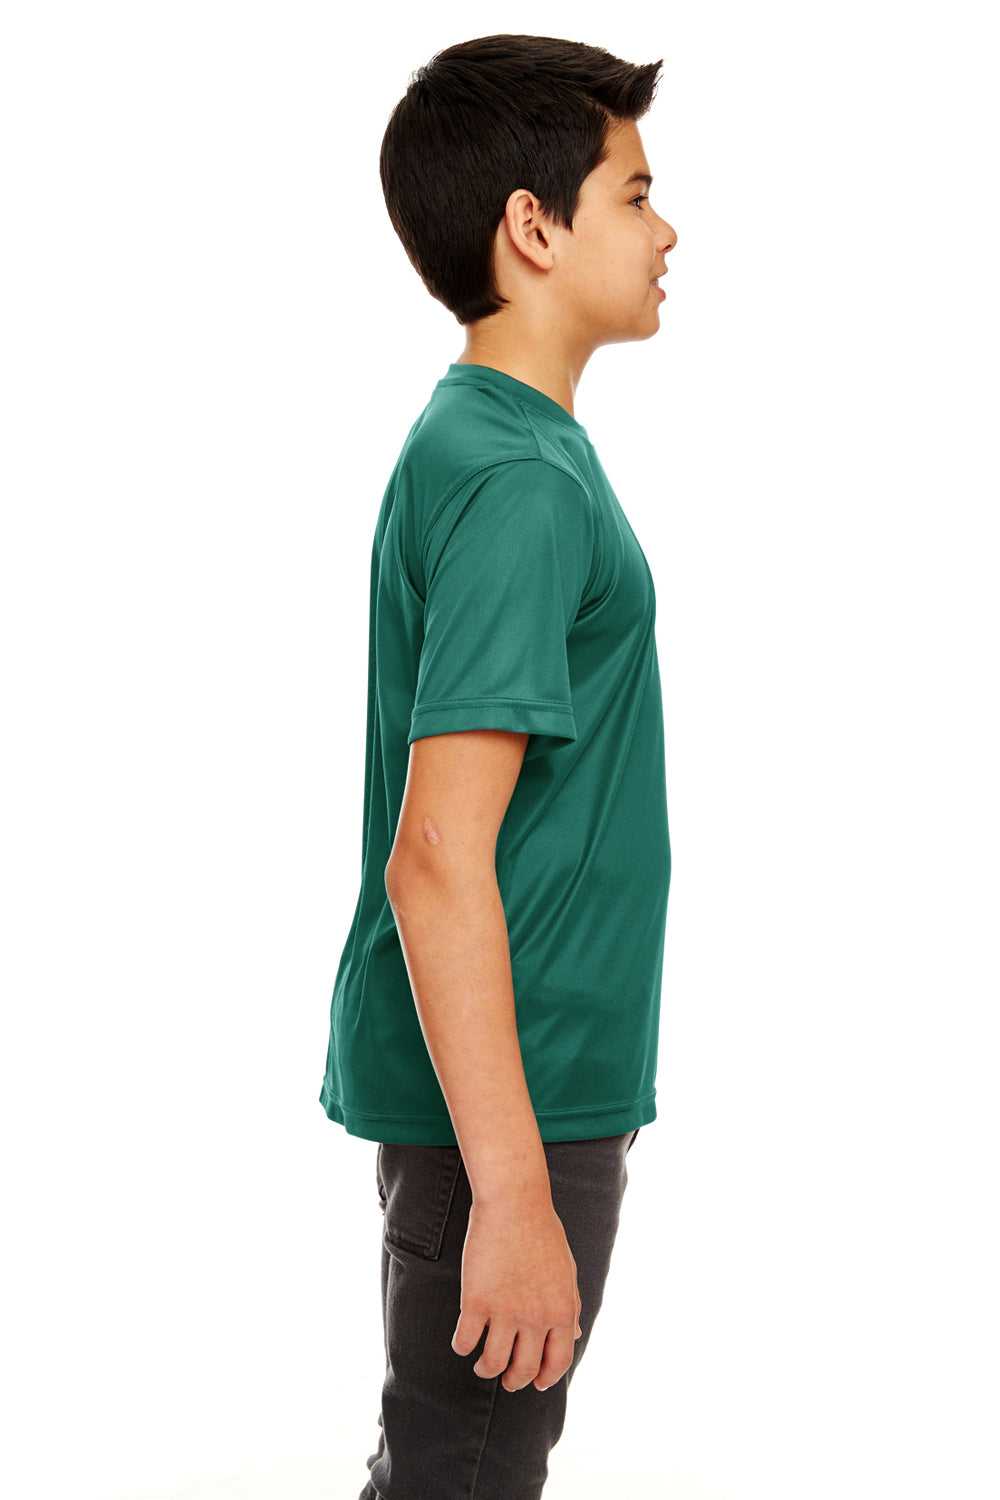 UltraClub 8420Y Youth Cool & Dry Performance Moisture Wicking Short Sleeve Crewneck T-Shirt Forest Green Side